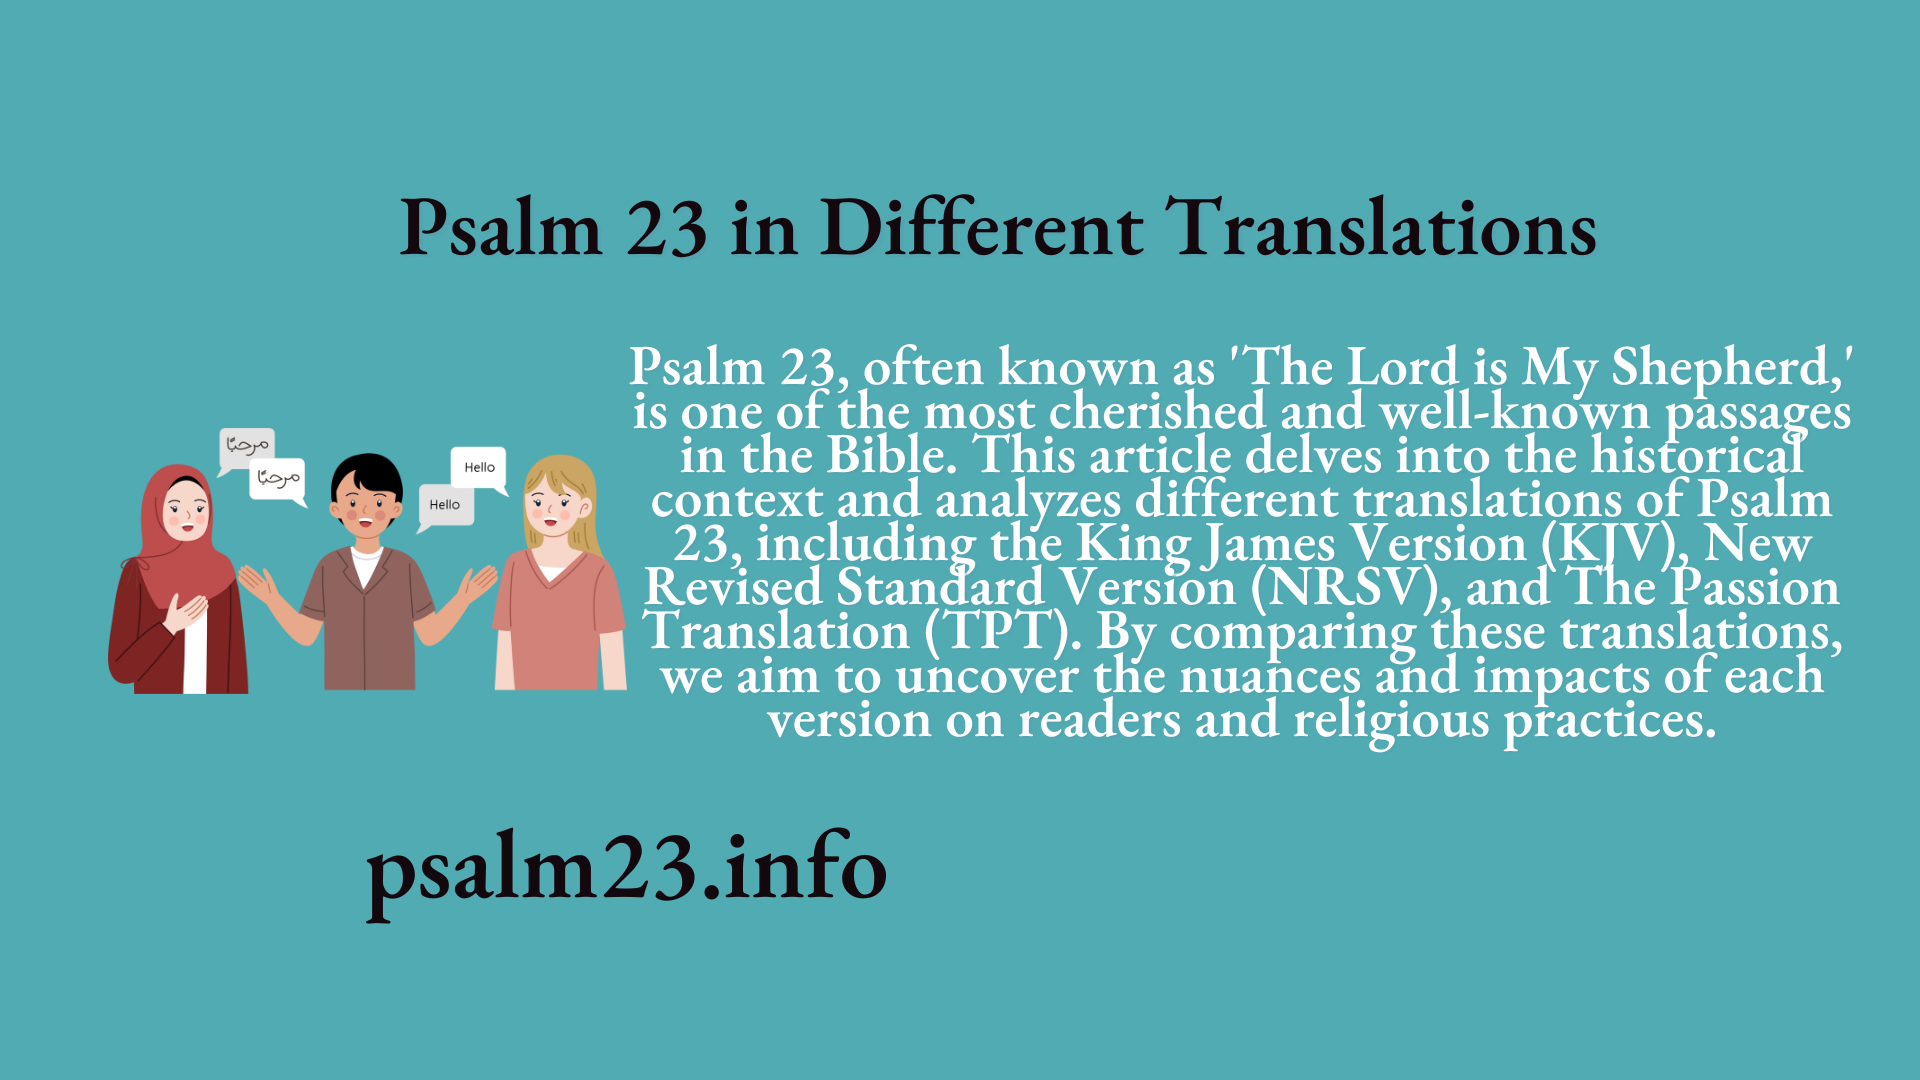 Psalm 23 in Different Translations